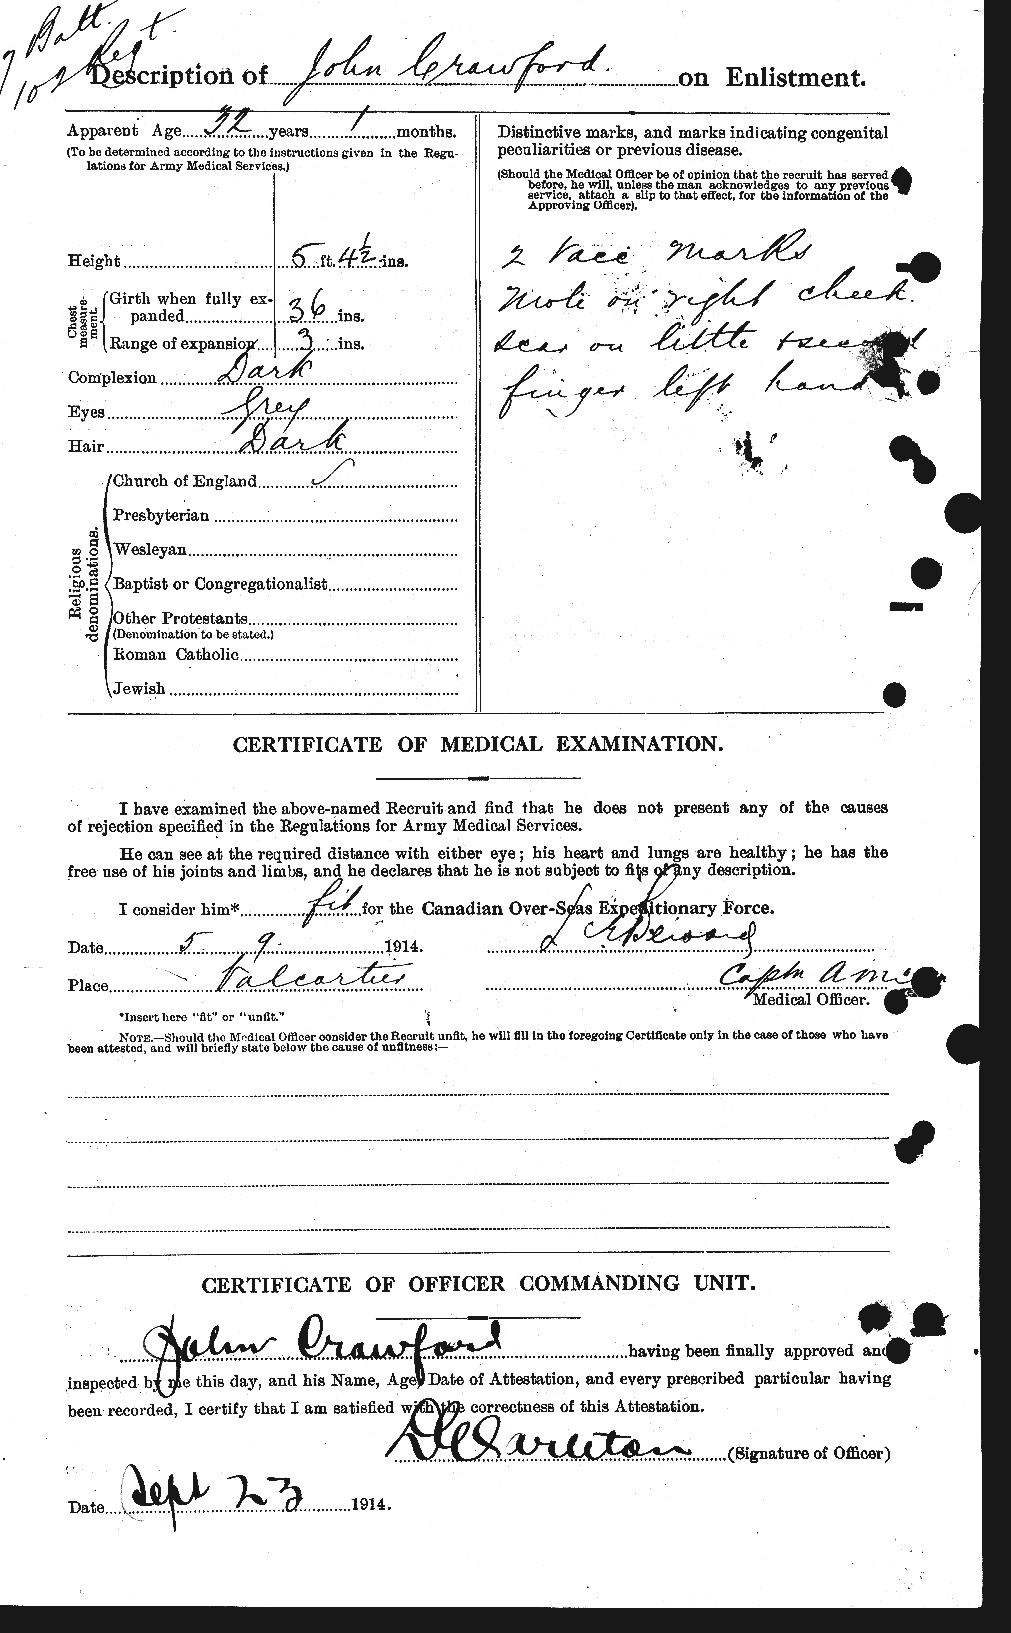 Personnel Records of the First World War - CEF 062452b